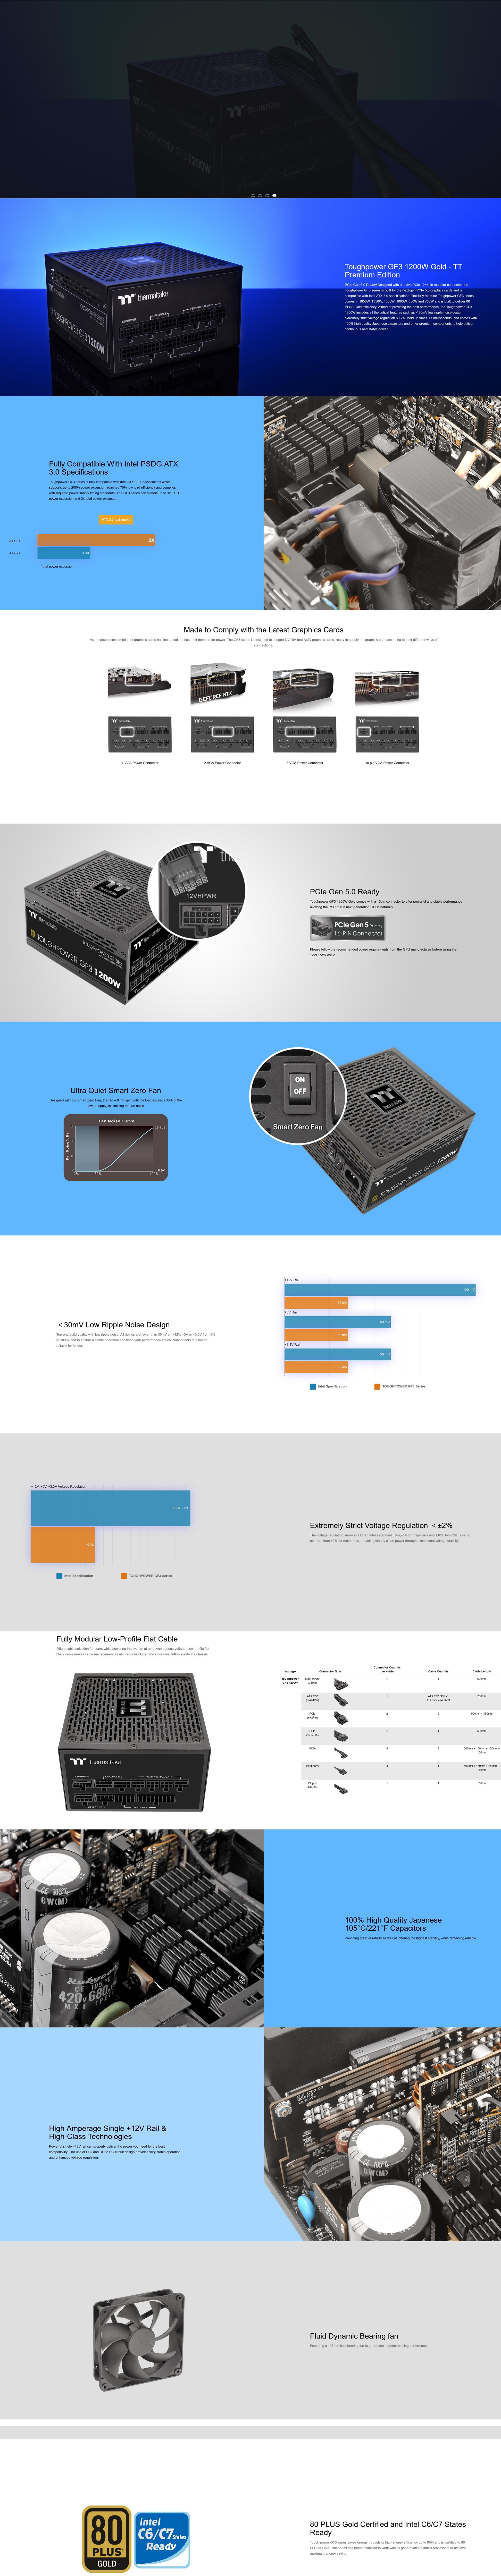 A large marketing image providing additional information about the product Thermaltake Toughpower GF3 - 1200W 80PLUS Gold PCIe 5.0 ATX Modular PSU - Additional alt info not provided